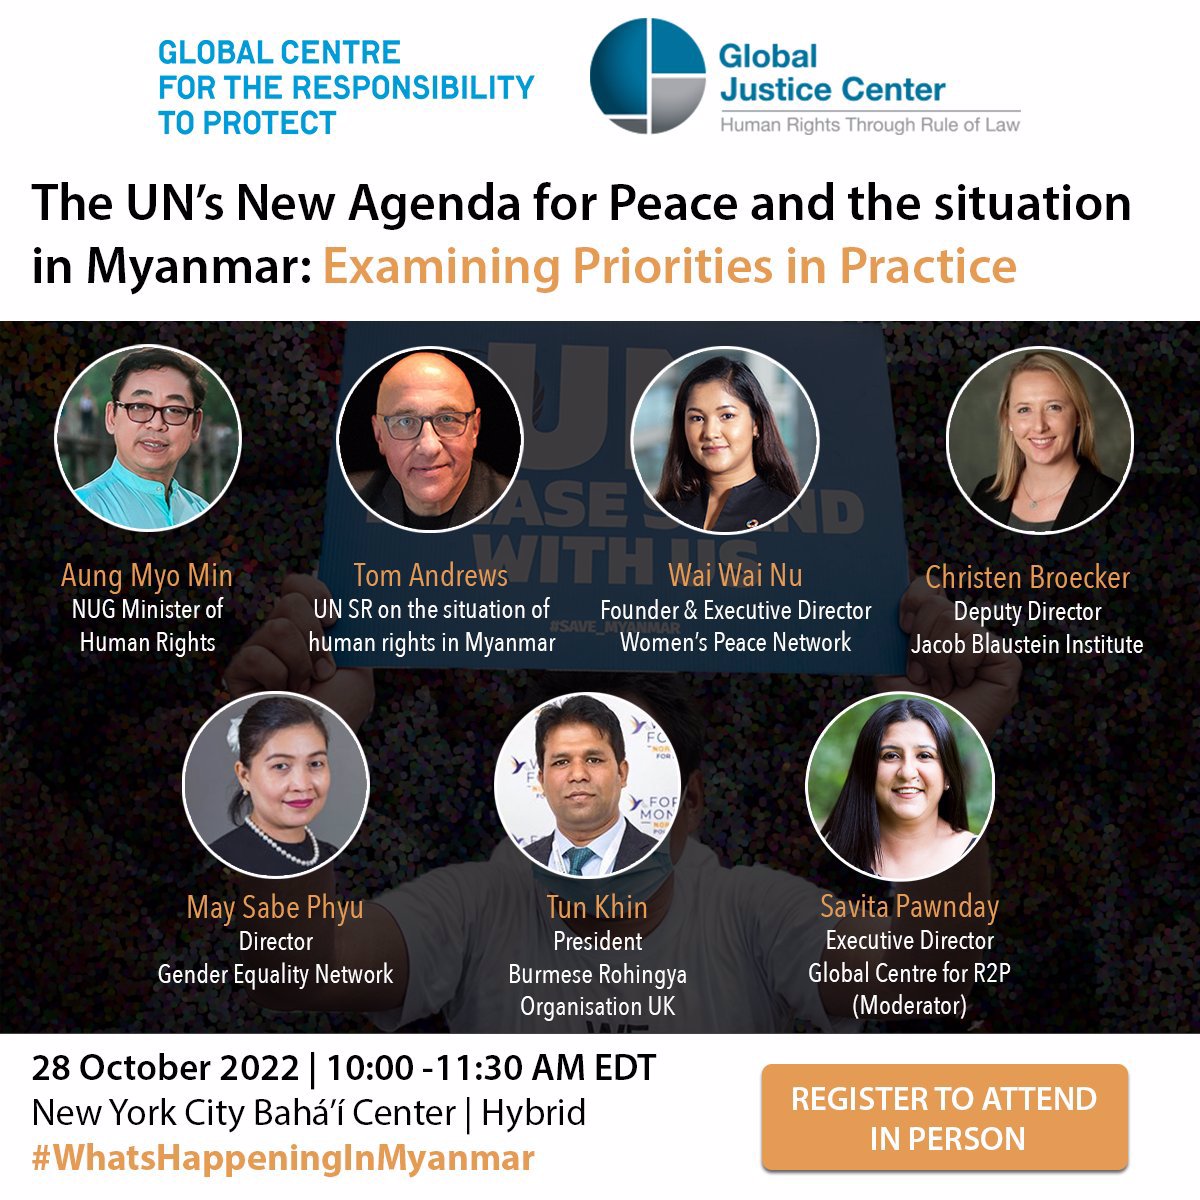 GJC &GCR2P Webinar: The UN's New Agenda for Peace and the situation in Myanmar